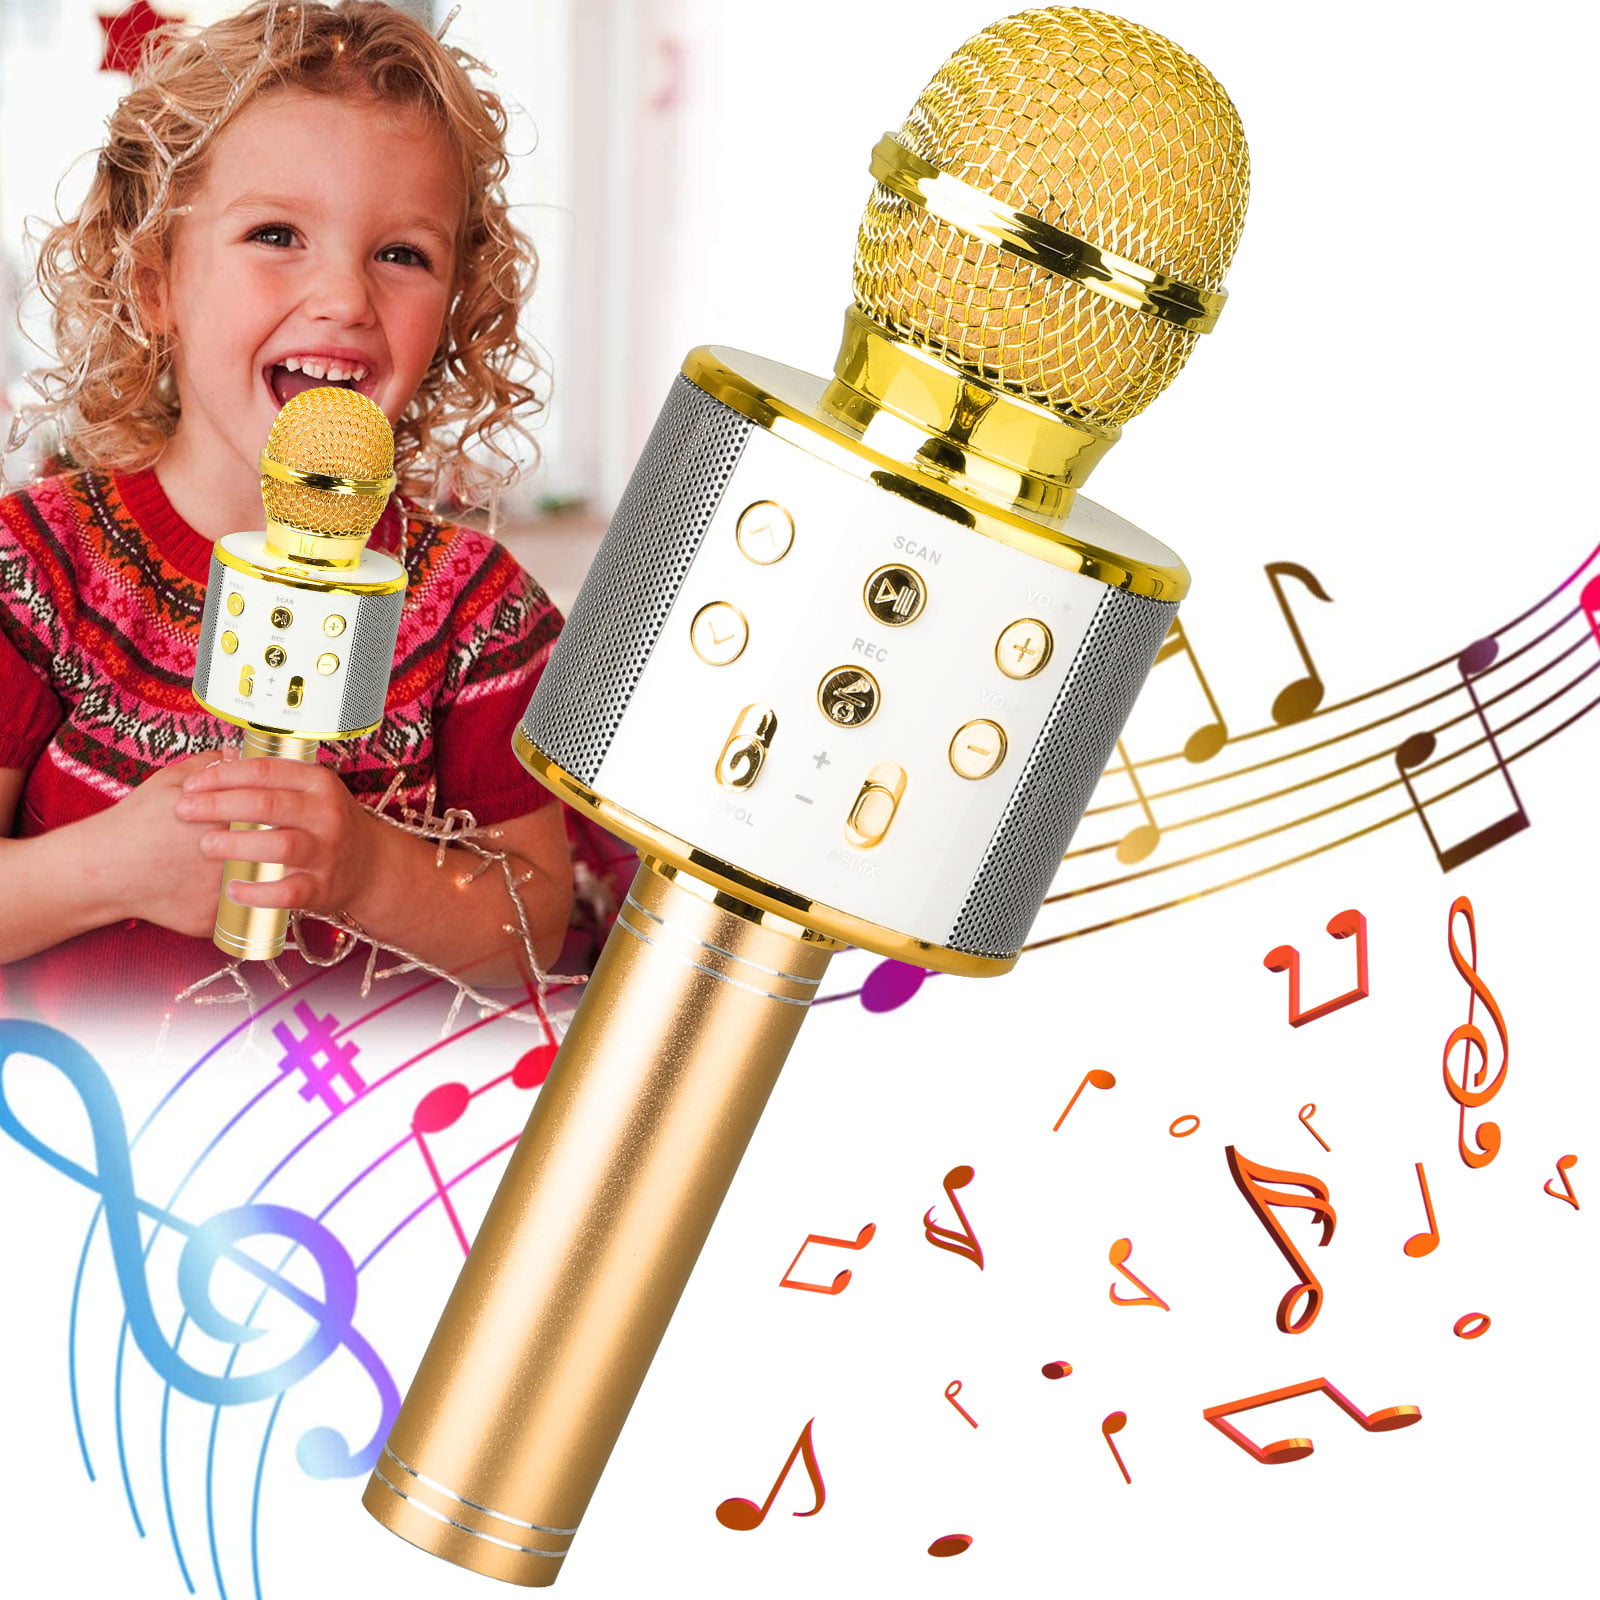 Wireless Bluetooth Microphone for Kids 4-in-1 Toy Microphone Echo Mic Karaoke Machine Portable Handheld Microphones Christmas Birthday Gifts for Toddler Children Boy Girls Kids Karaoke Microphone 